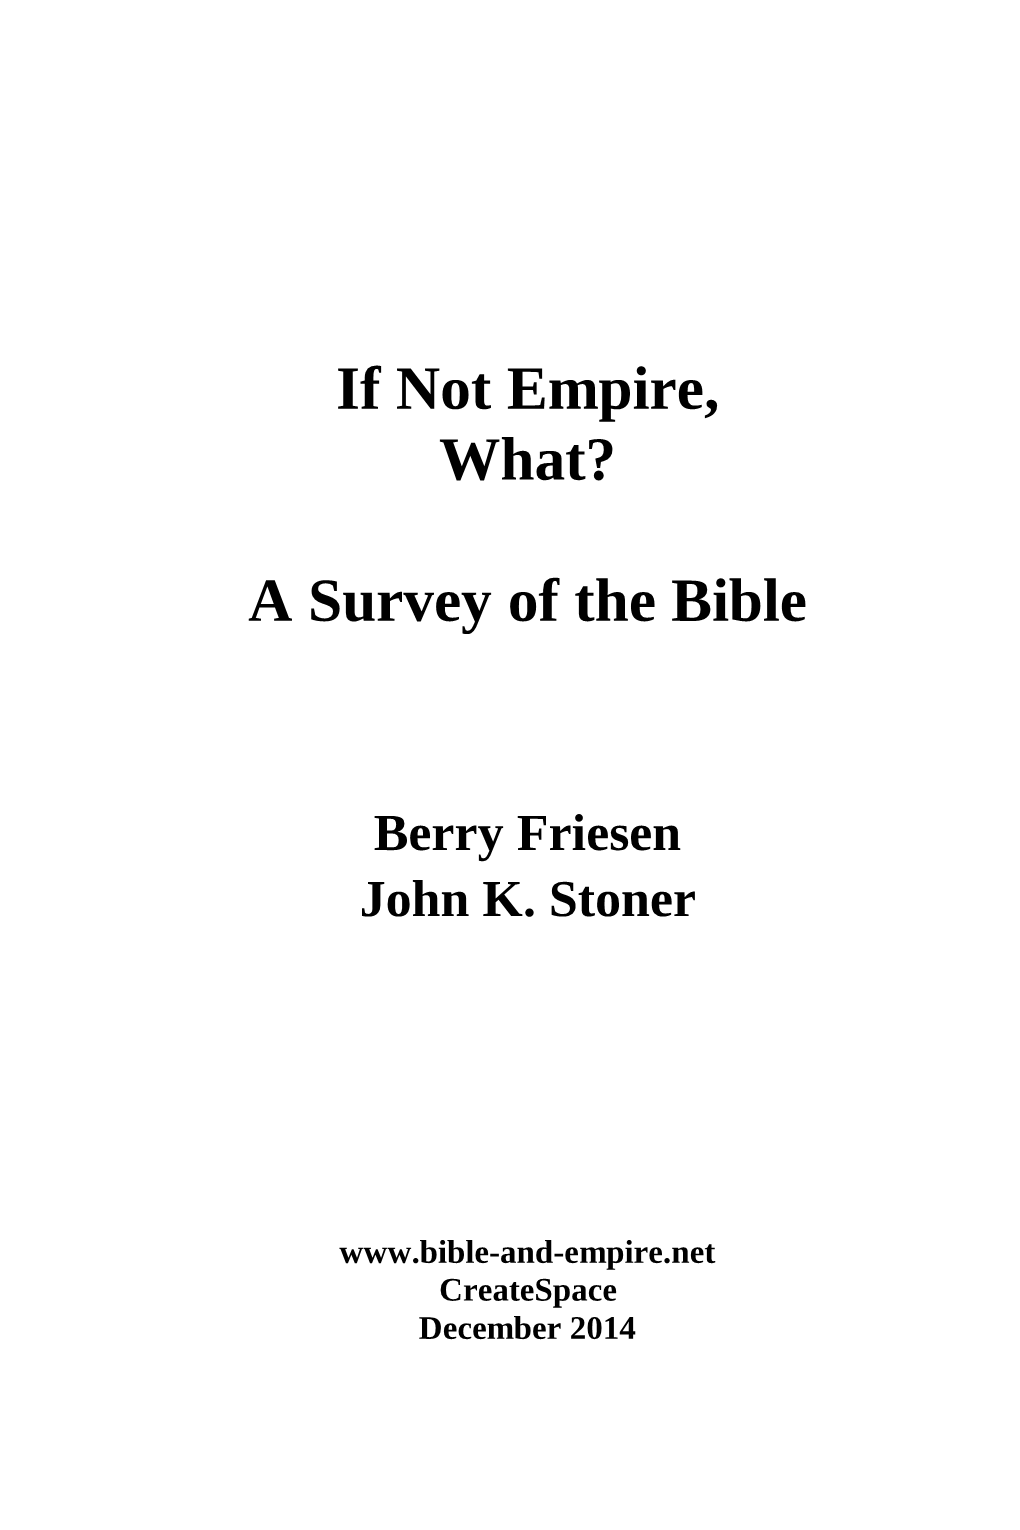 If Not Empire, What? a Survey of the Bible